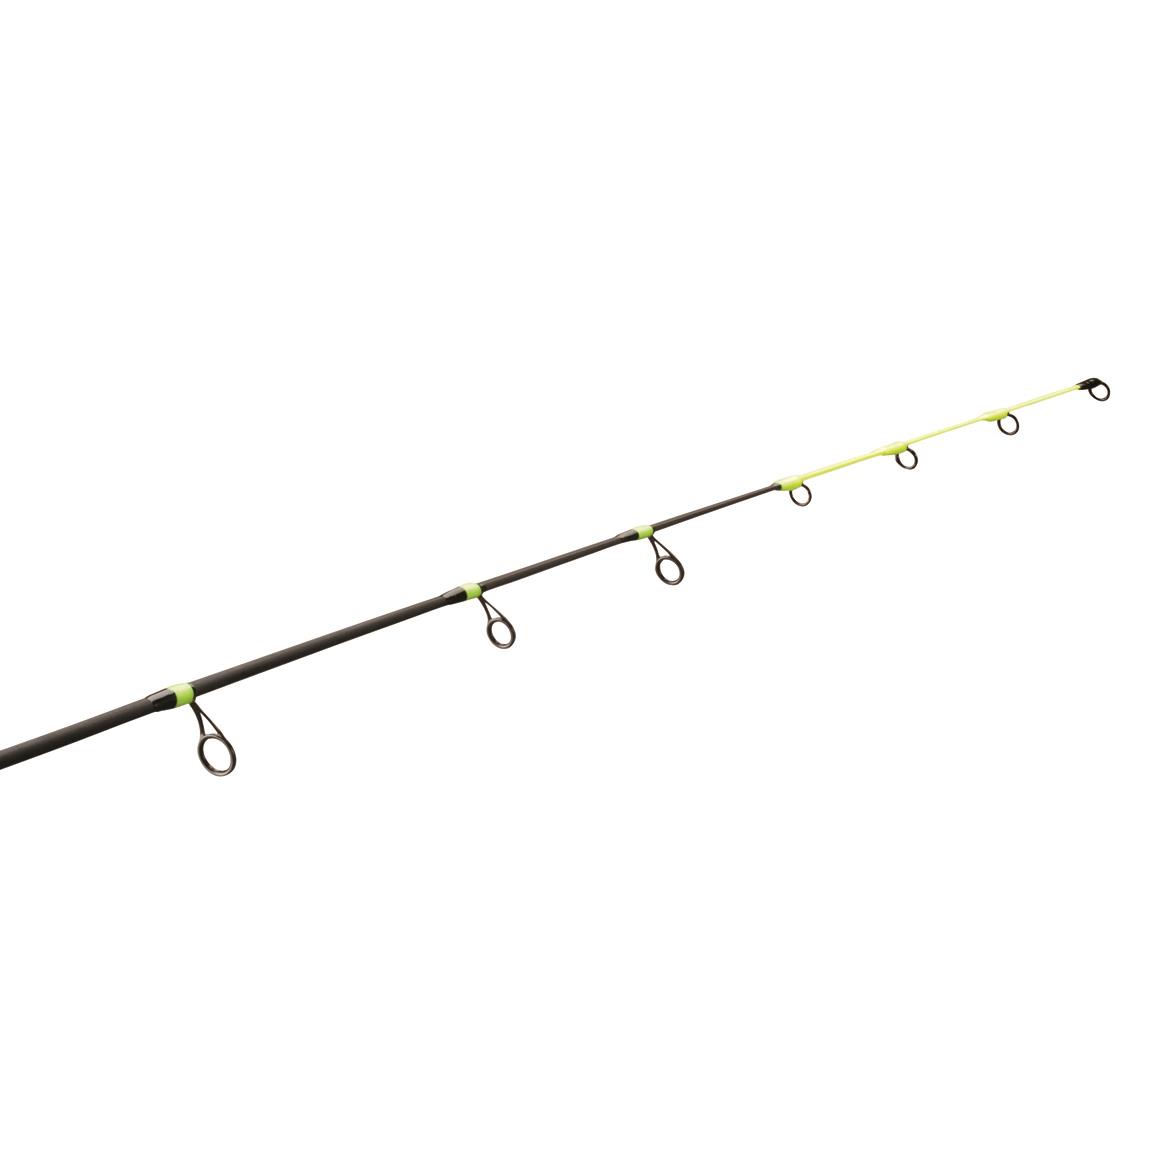 St. Croix Legend Black Ice Series Fishing Rod, 24, Light Power - 723878,  Ice Fishing Rods at Sportsman's Guide